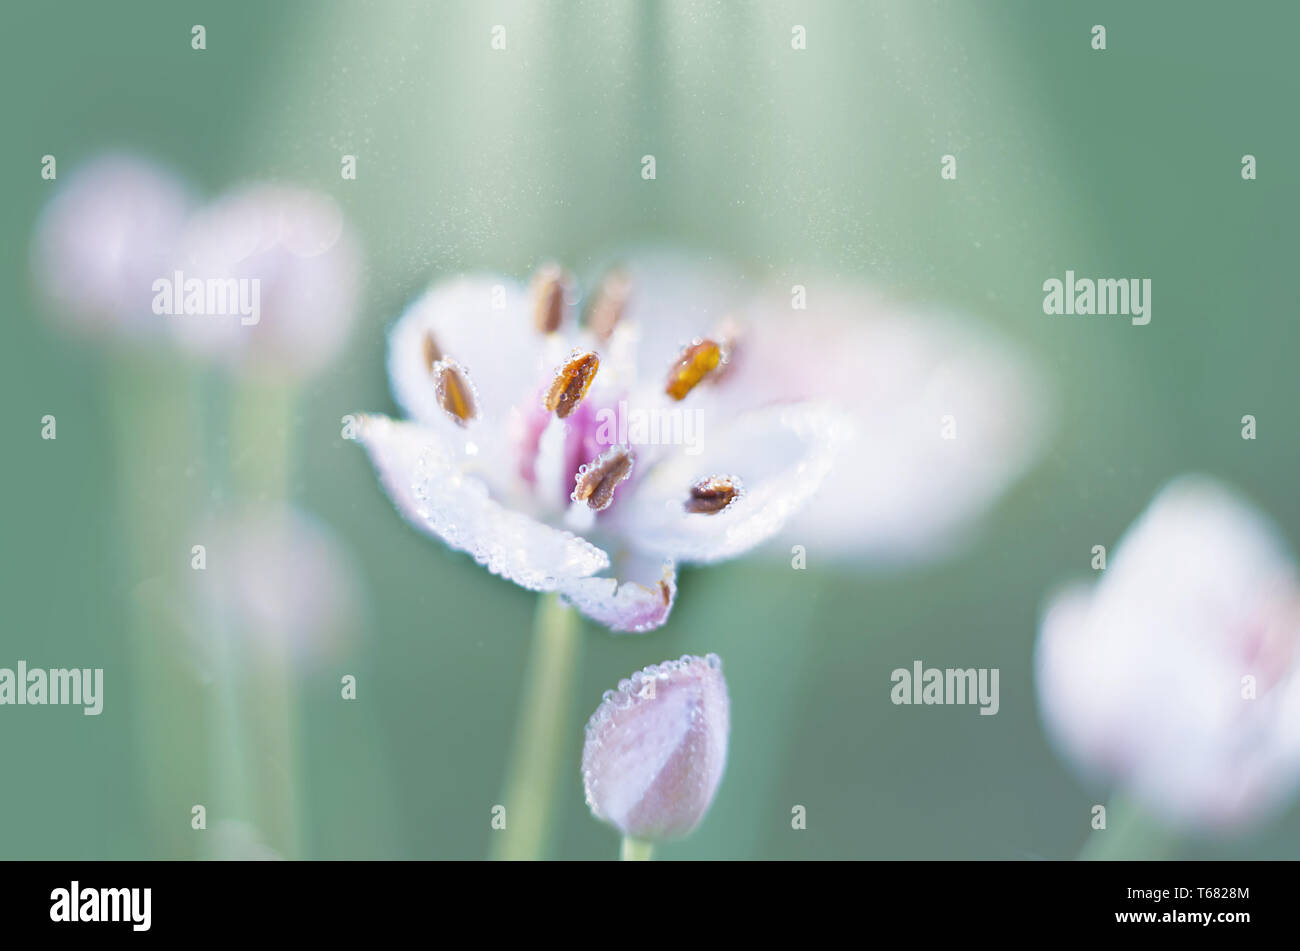 Defocused background of wildflowers. Light effect and drops. Stock Photo